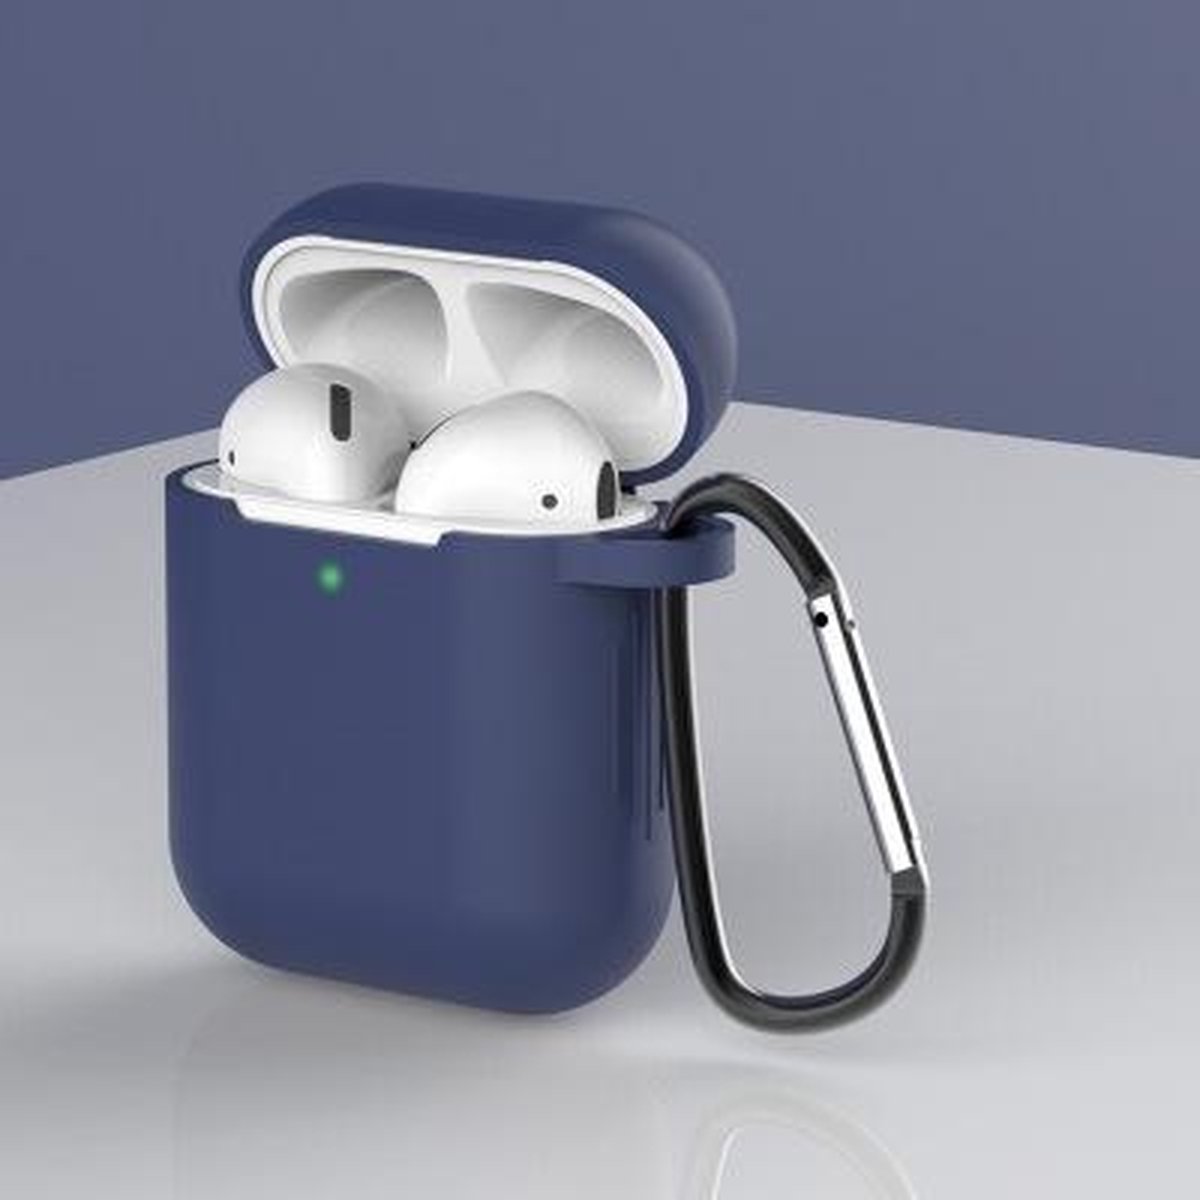 Apple AirPods 1/2 Hoesje + Clip in het donker Blauw - Siliconen - Case - Cover - Soft case